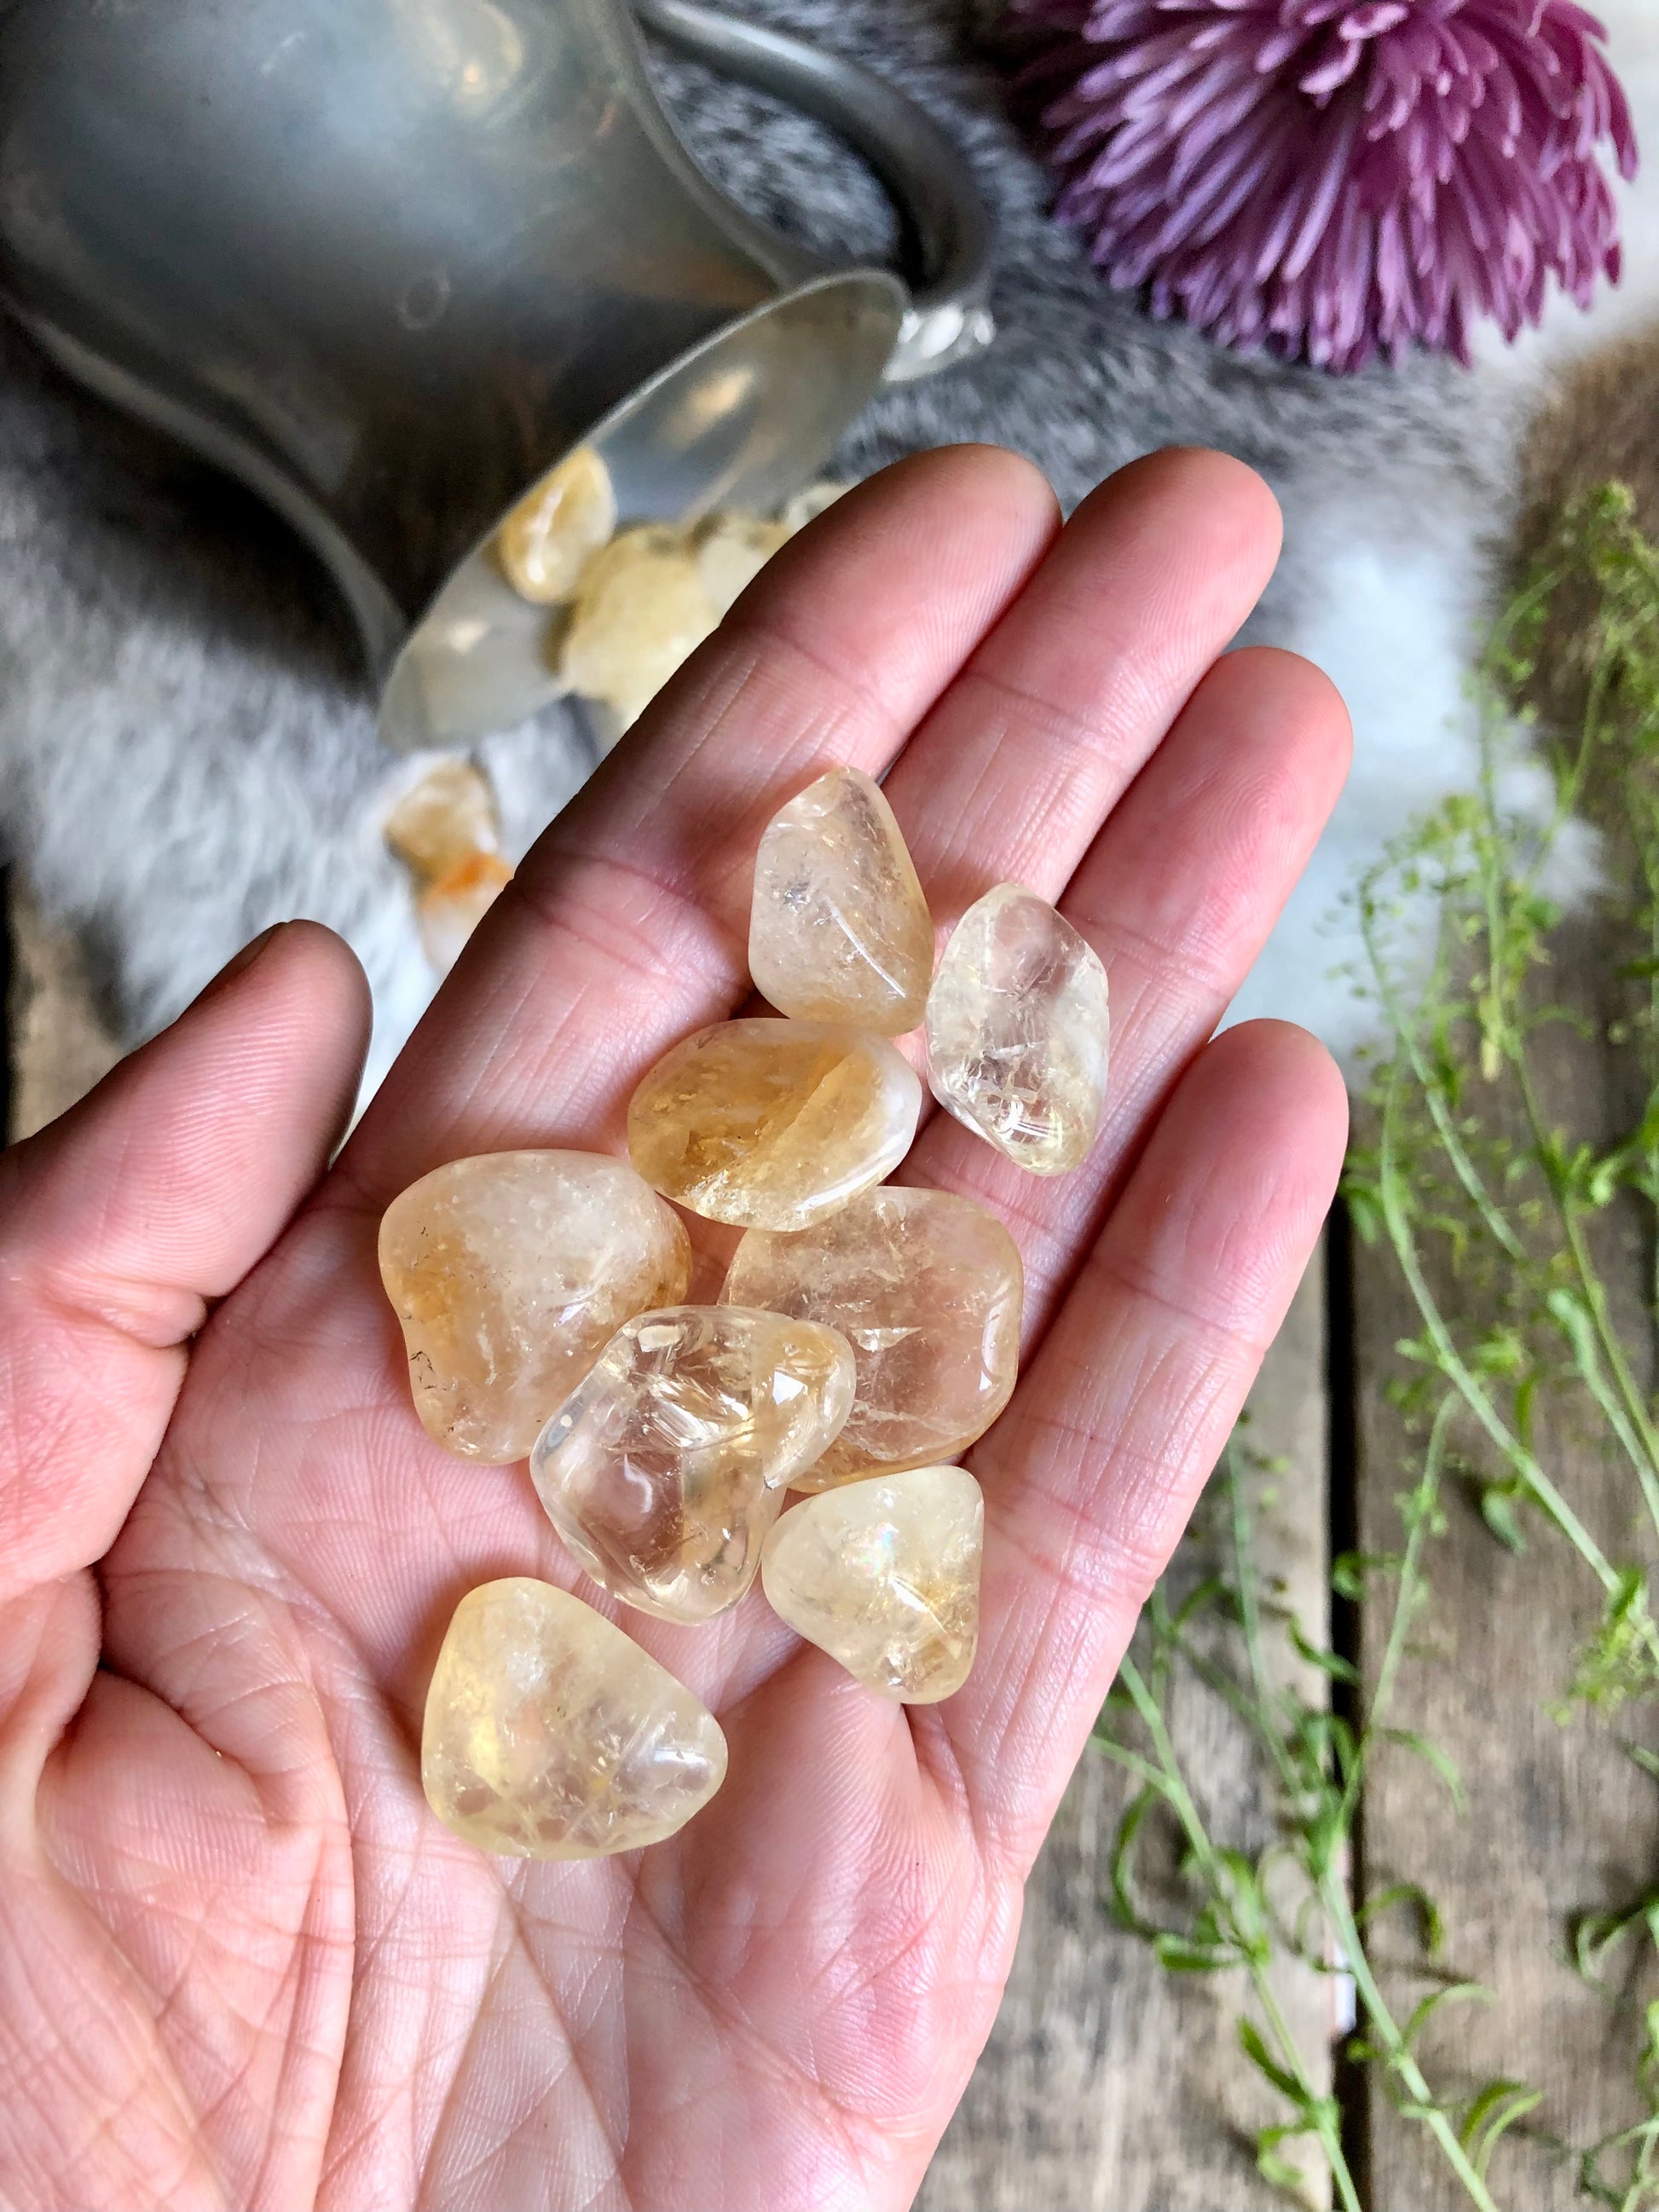 Citrine tumbled stones lay in hand over boho background of fur, wood and flowers